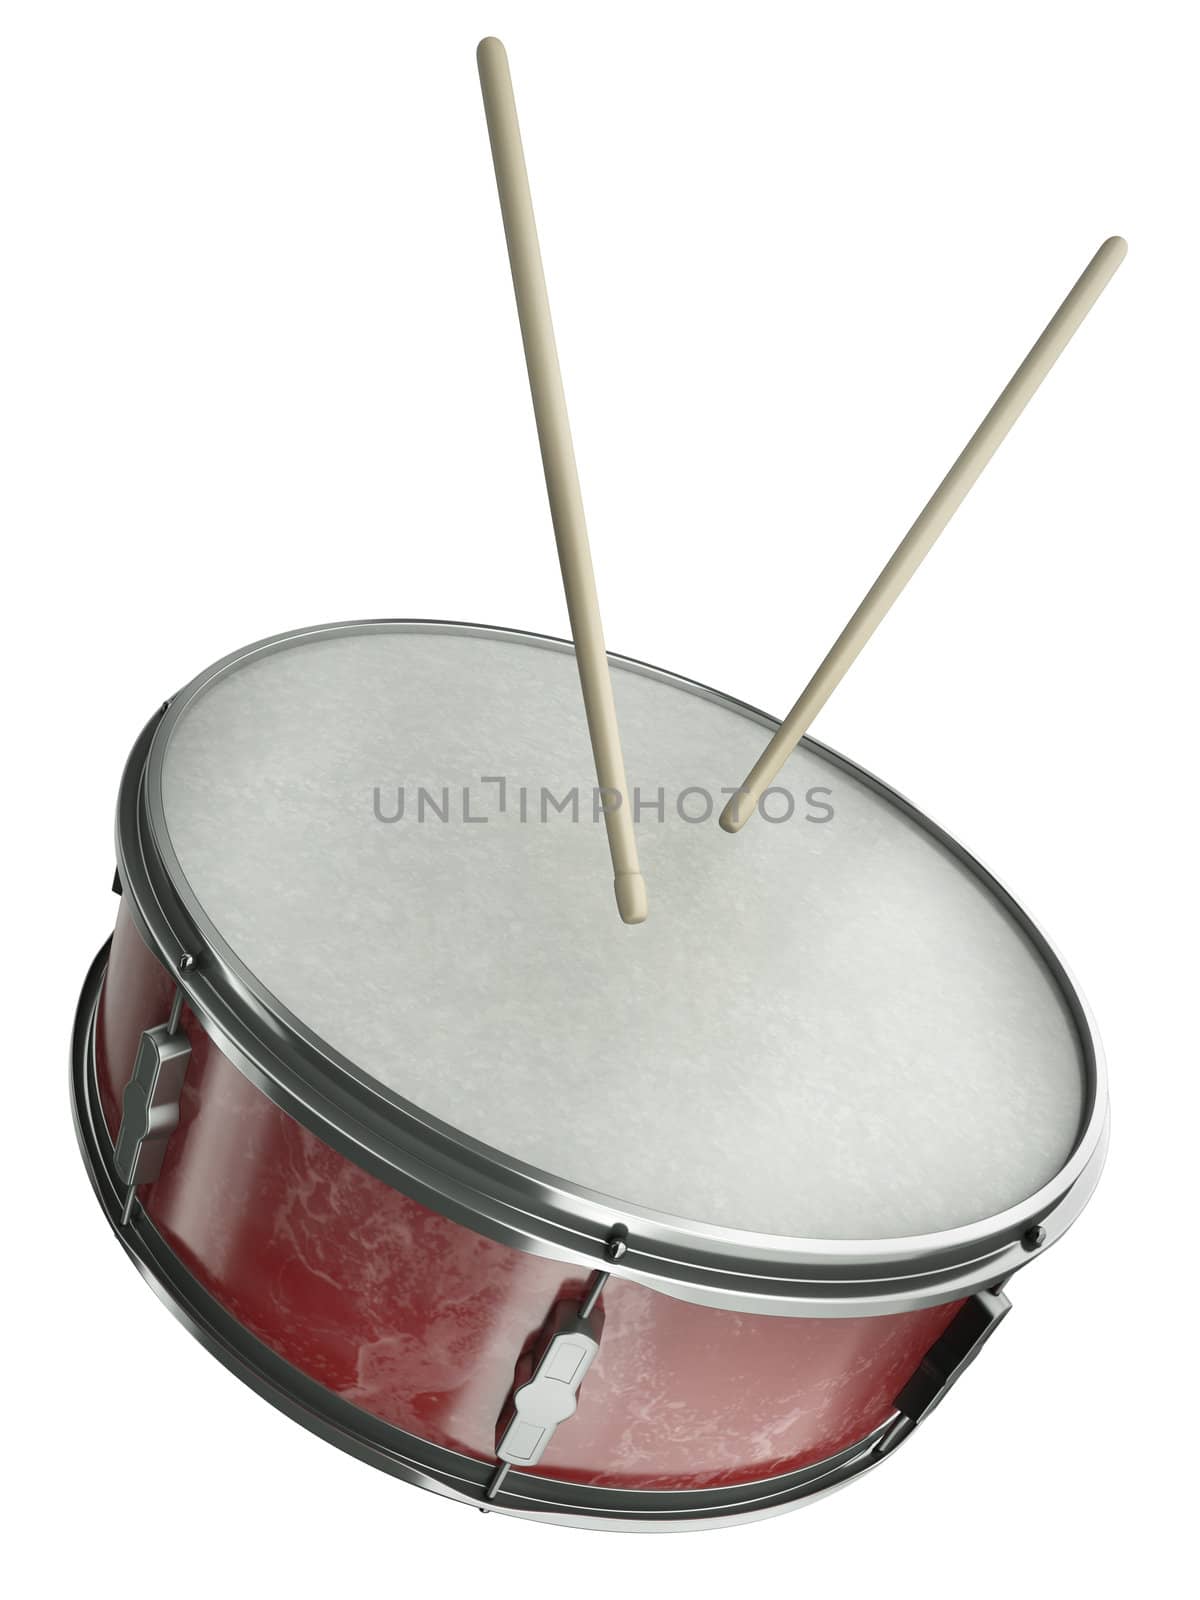 Snare drum and drumsticks isolated on white background. 3D render